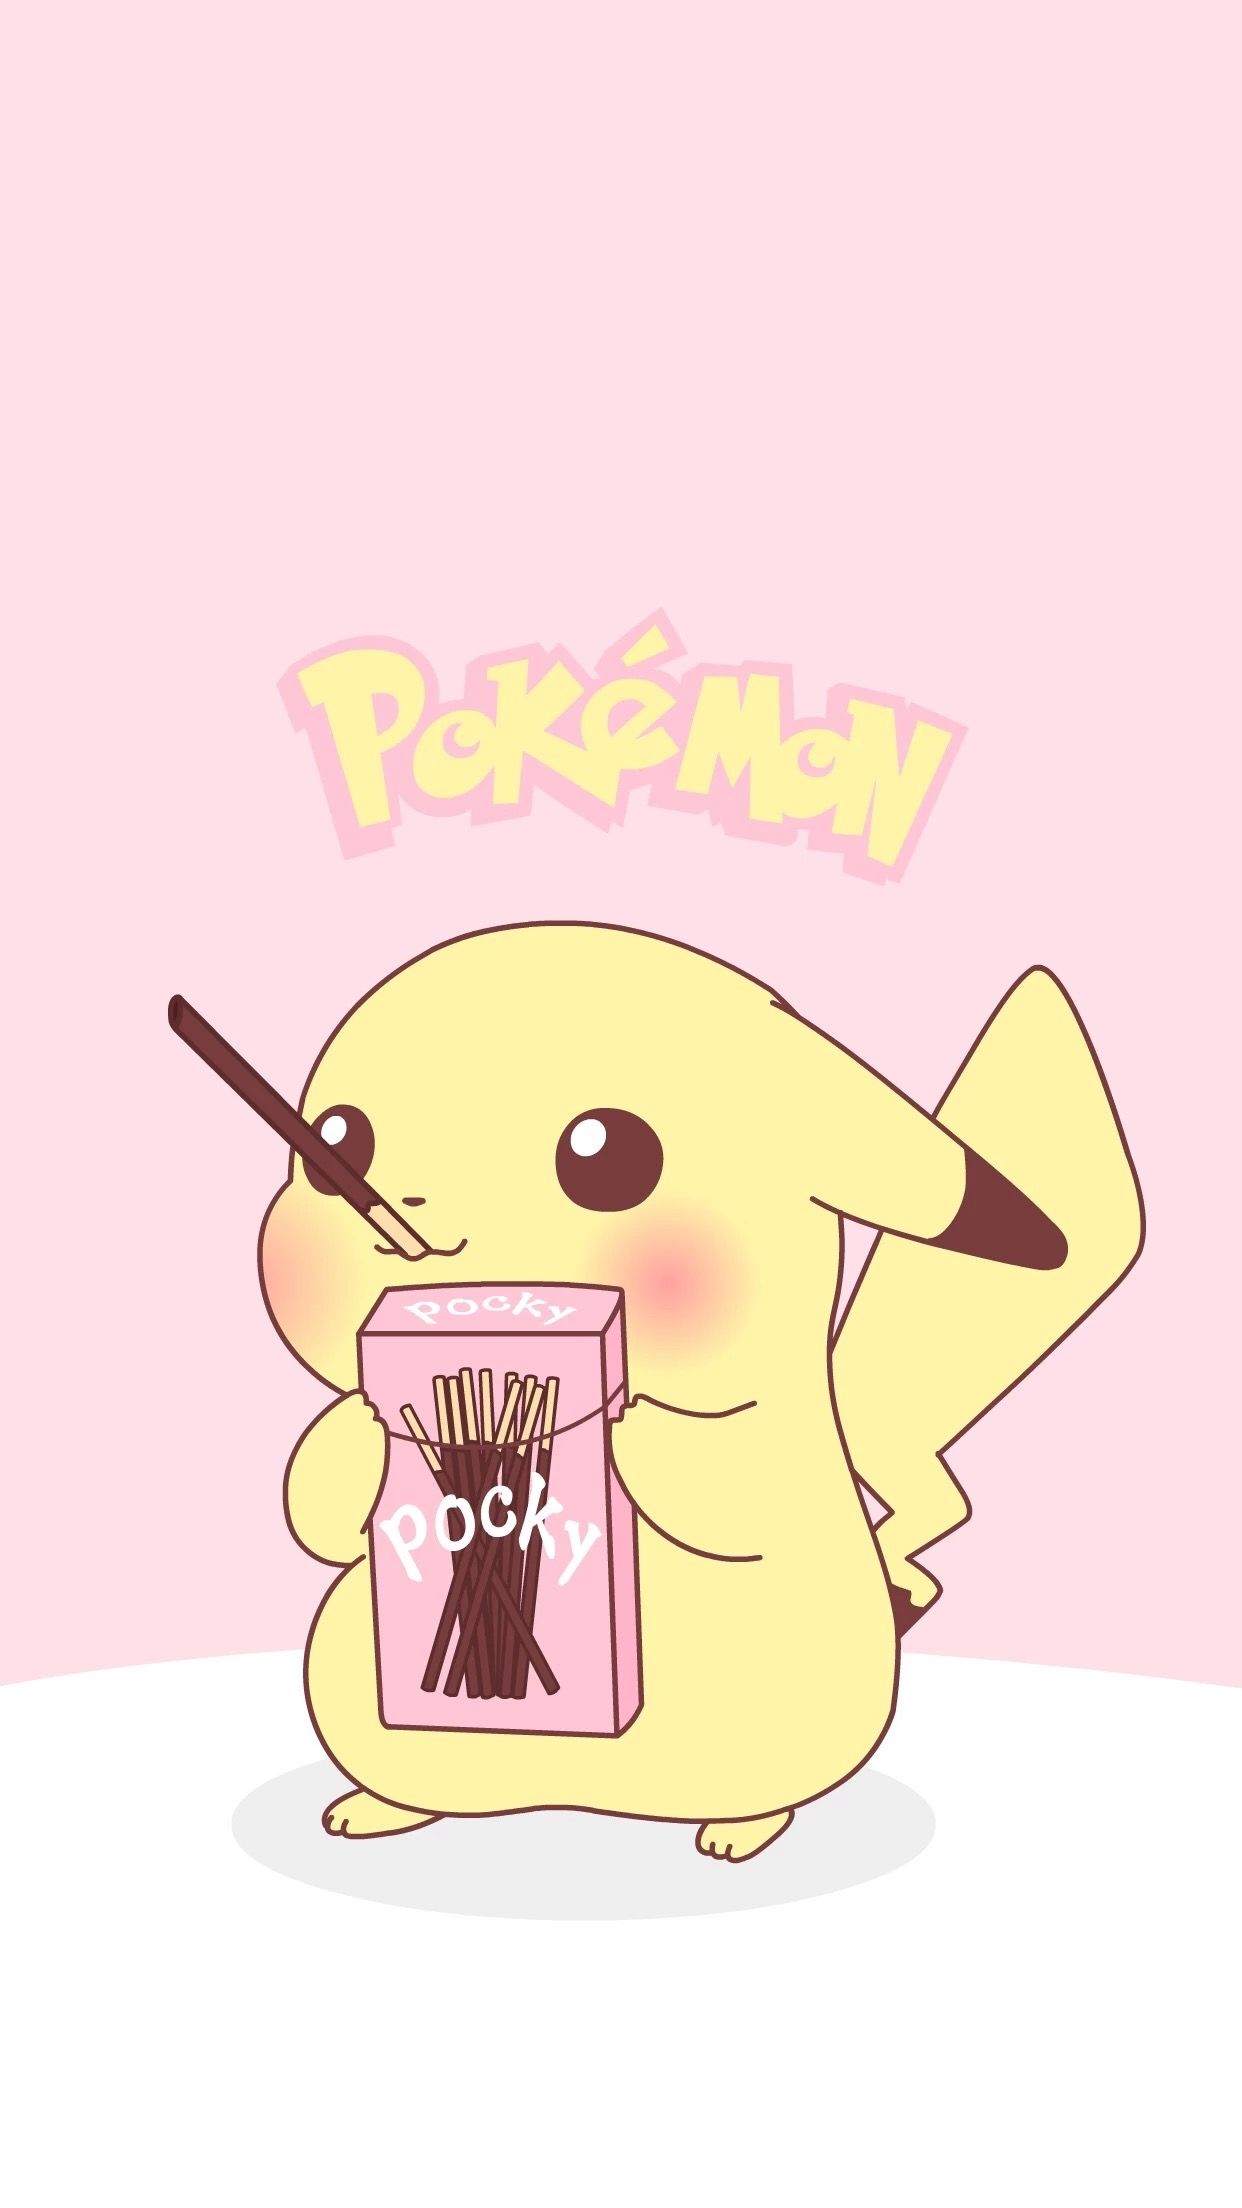 Pokemon wallpaper for phone, iPhone background, cute background, pikachu, wallpaper, phone background, phone wallpaper, background, wallpaper, phone, background, cute background, wallpaper, background, phone background, cute phone background, wallpaper, background, phone wallpaper, cute phone wallpaper, wallpaper, background, phone background, cute phone background - Pikachu, Pokemon, kawaii